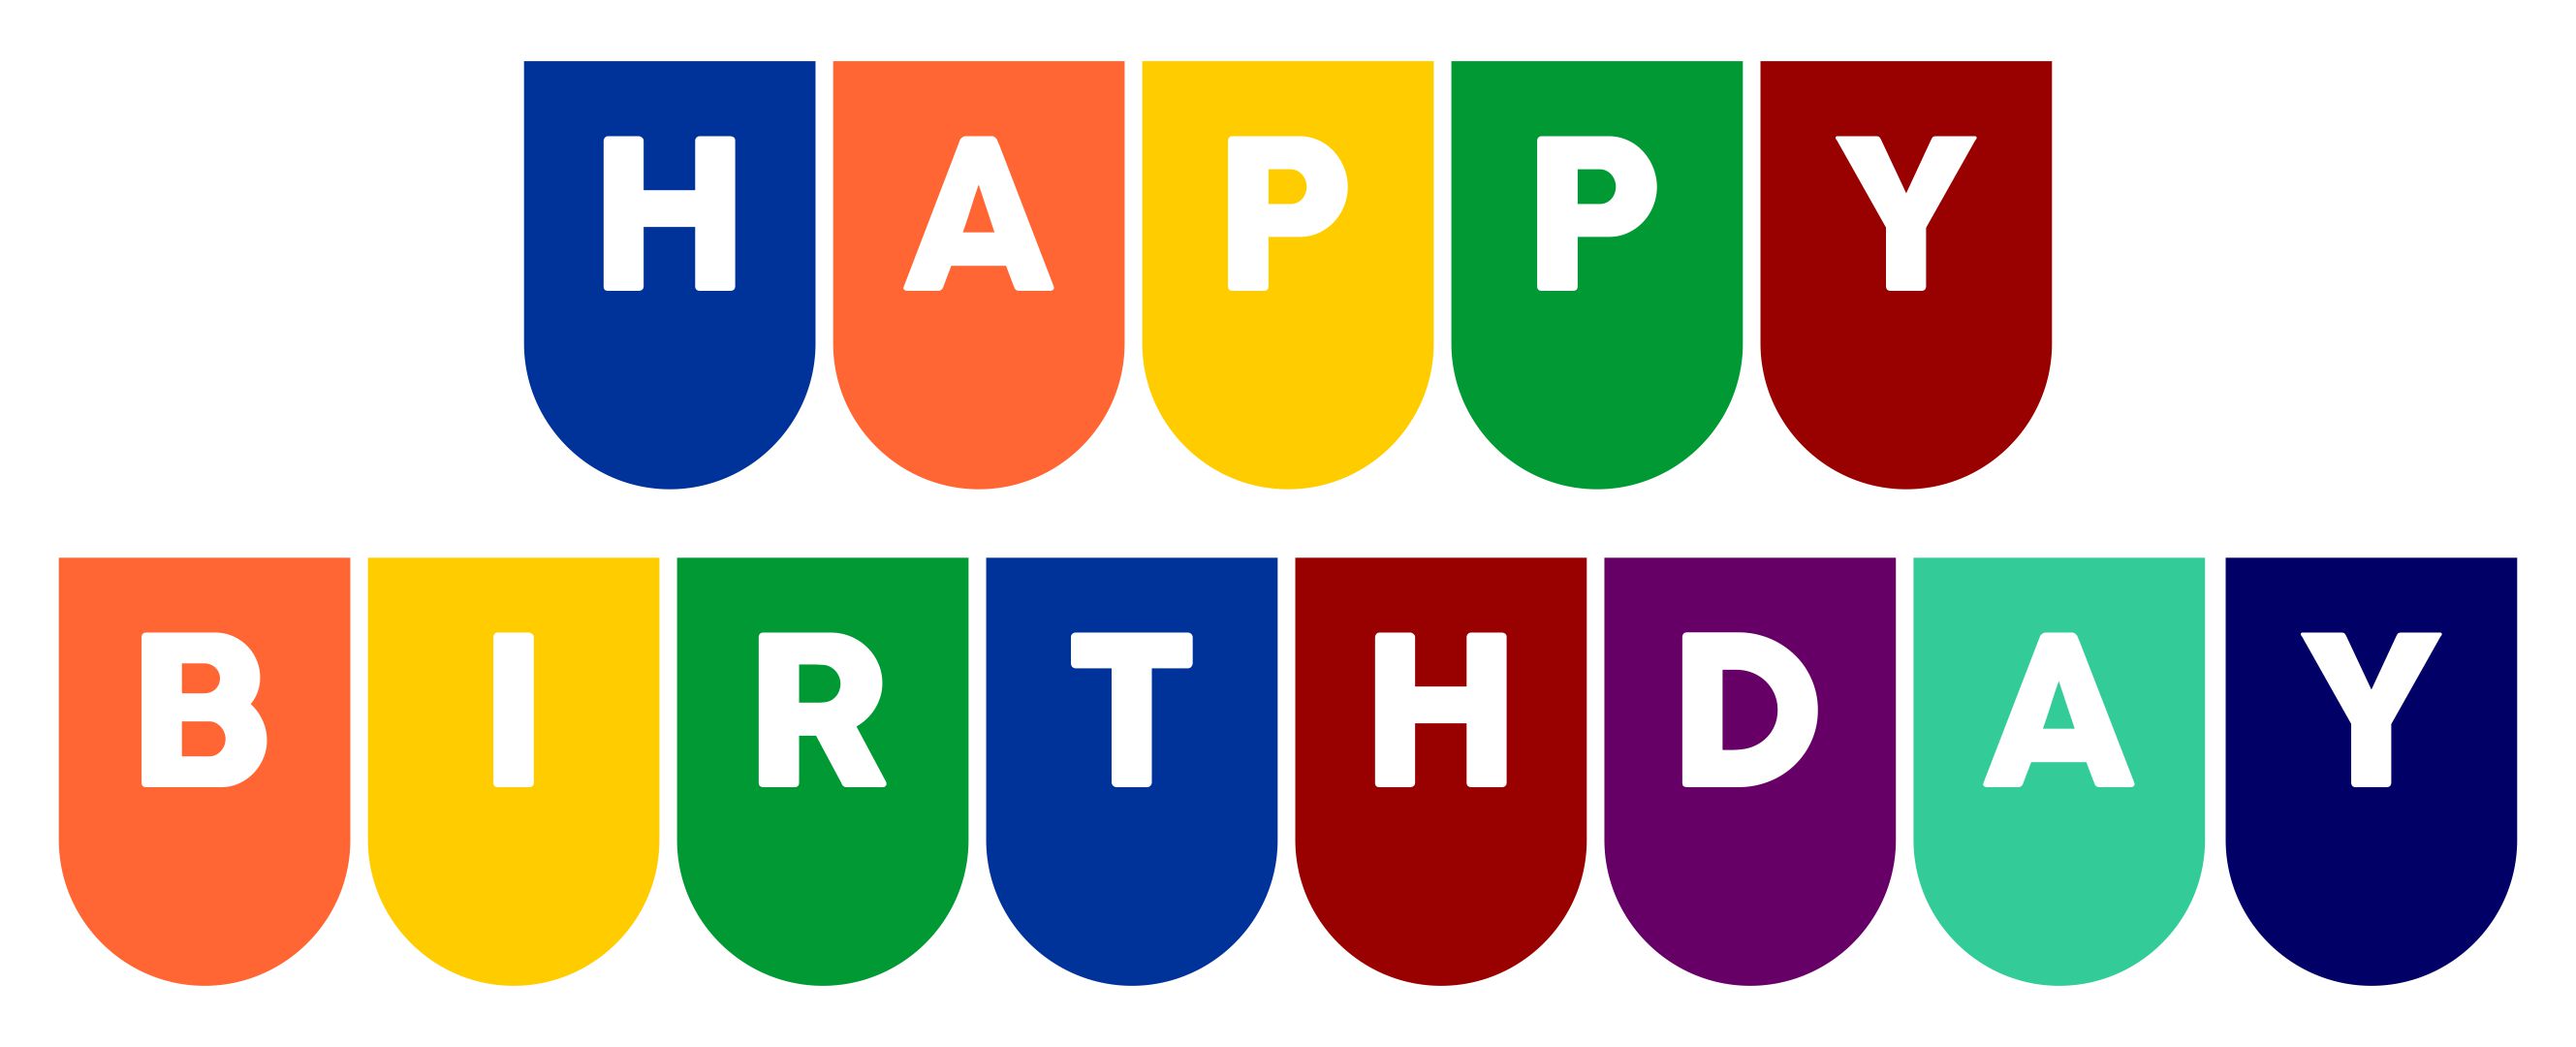 10 Best Happy Birthday Printable Banners Signs PDF For Free At Printablee